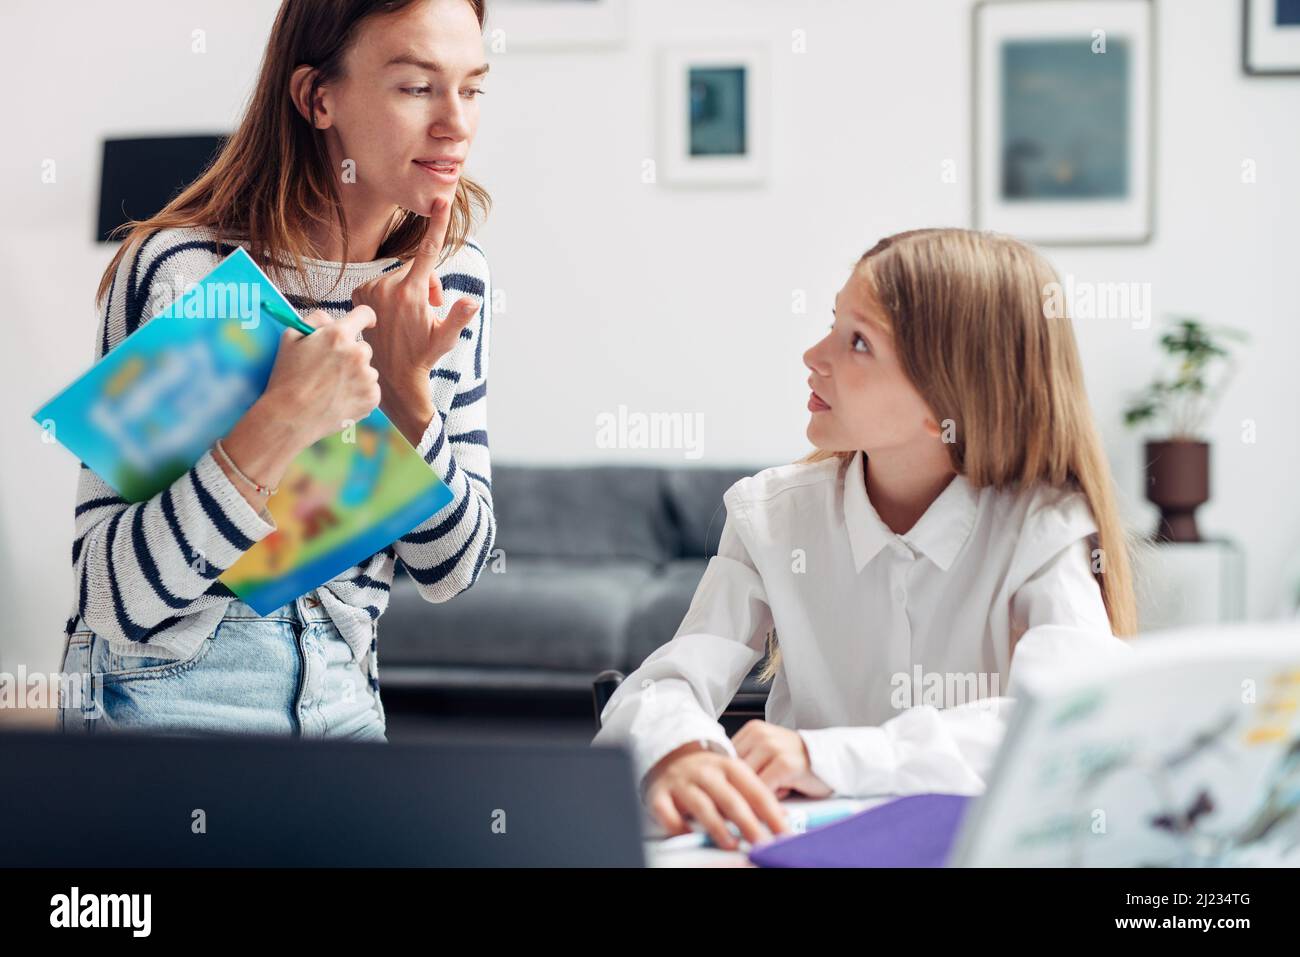 Woman teaches girl correct pronunciation of sounds or letters. Speech therapist or learning English. Stock Photo